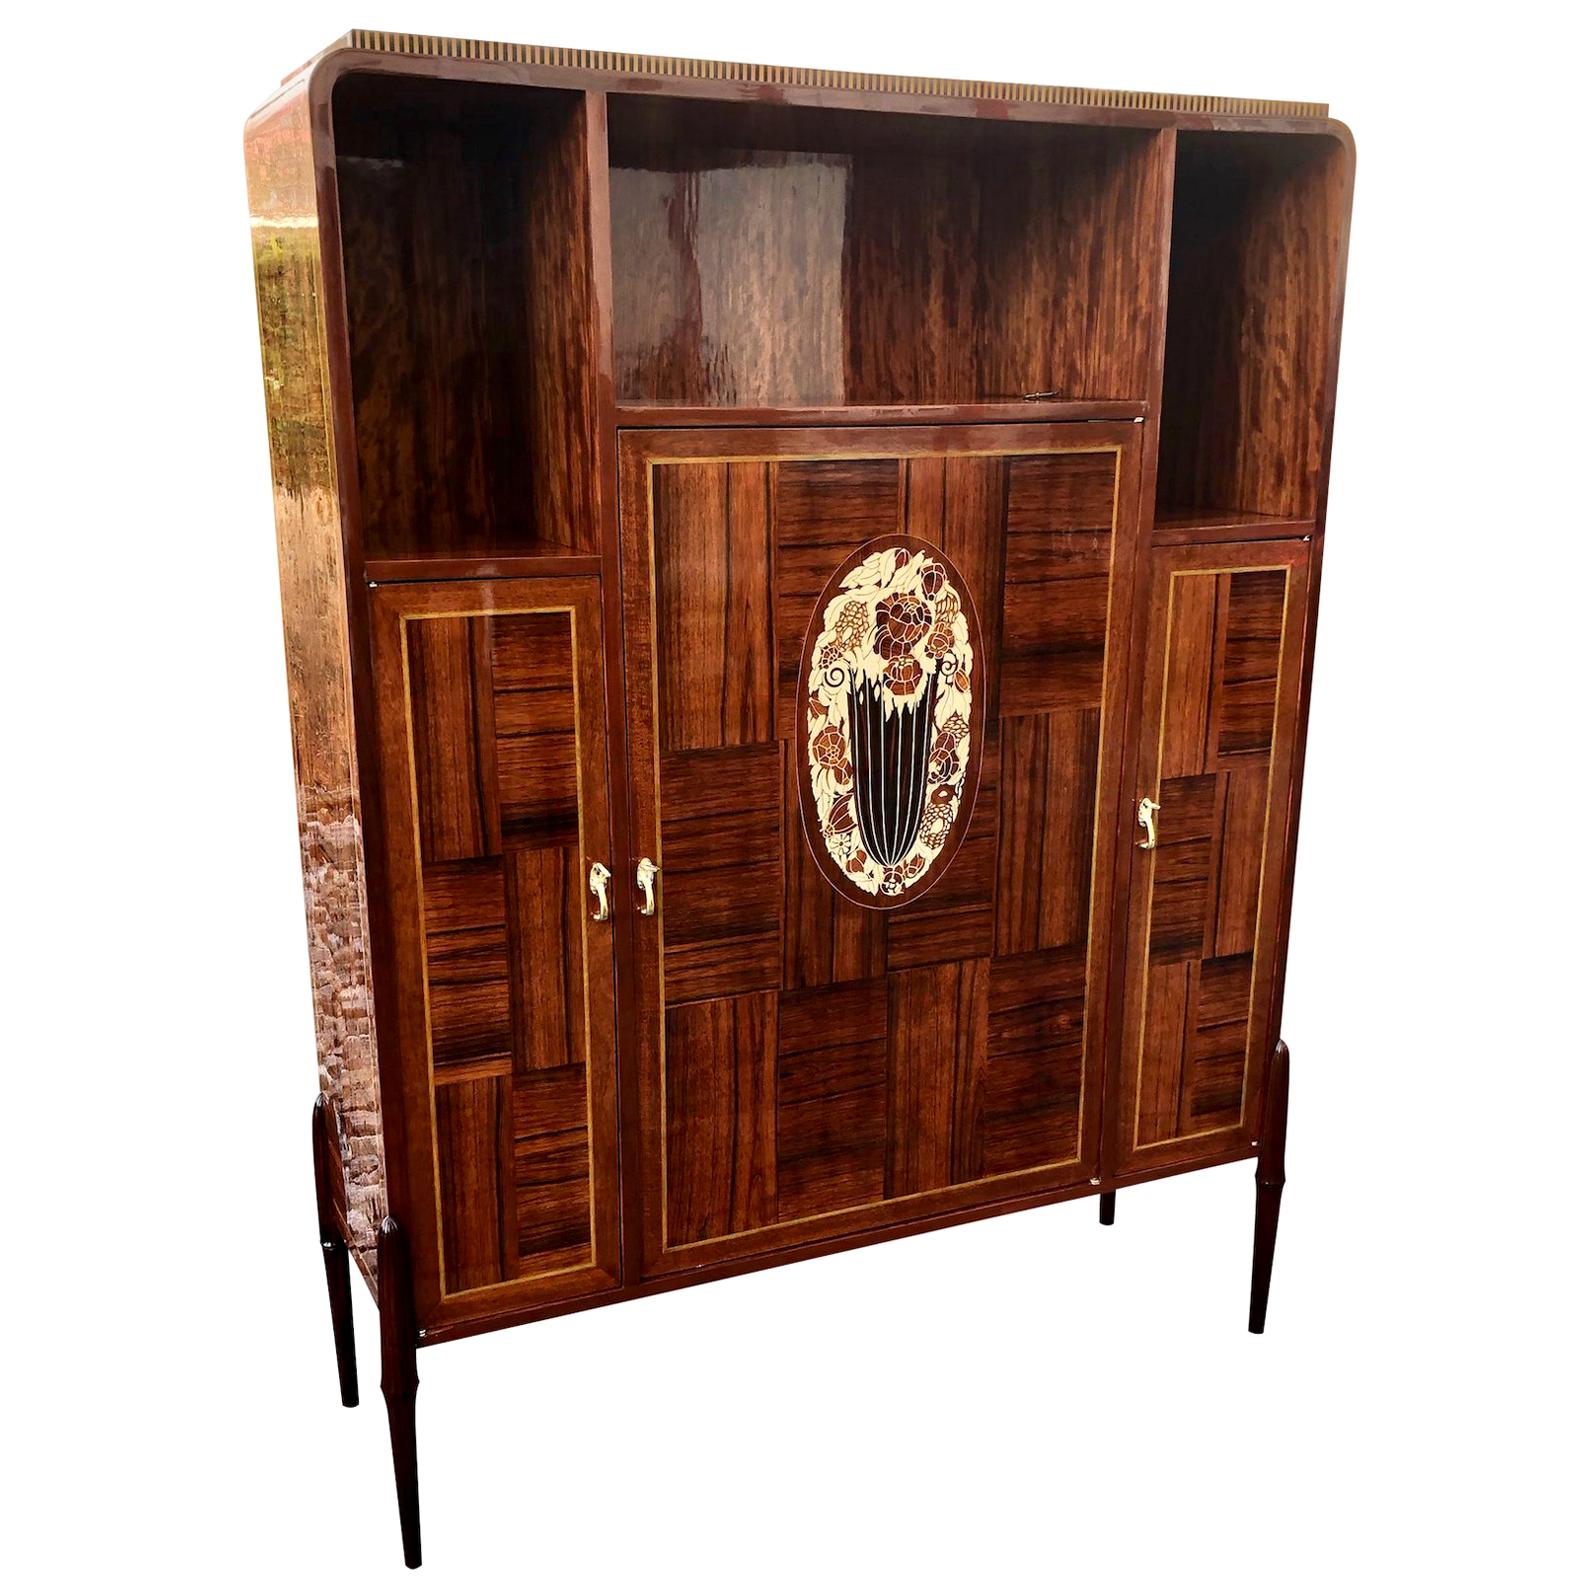 Real Wood Veneer Art Deco Cabinet with Inlays in Style of Jacques Emile Ruhlmann For Sale